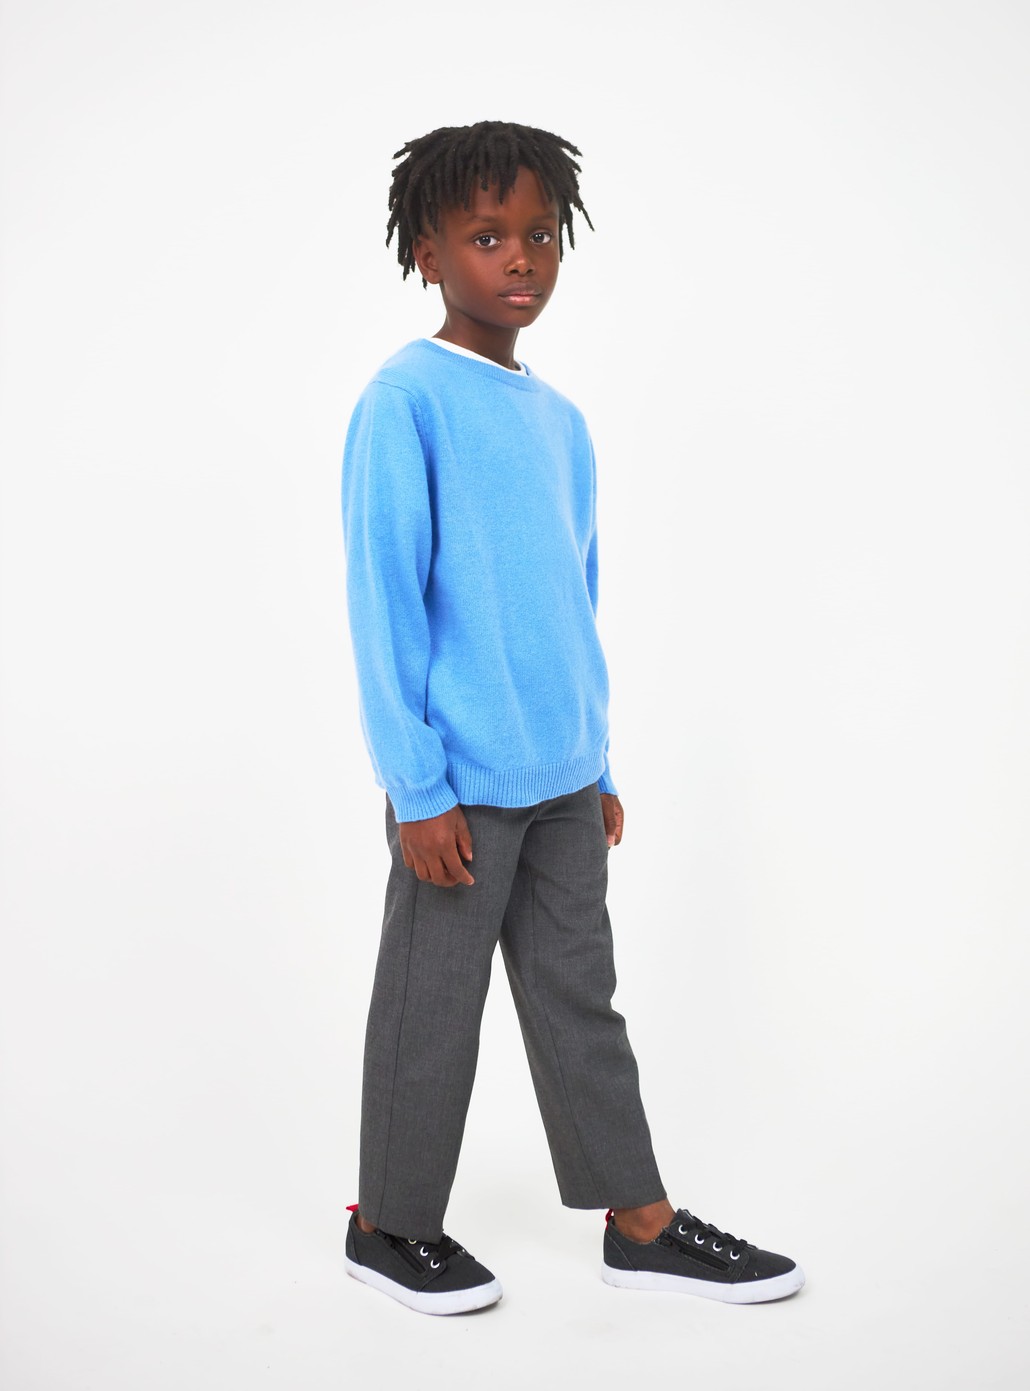 Boy wearing light blue cashmere sweater and gray pants